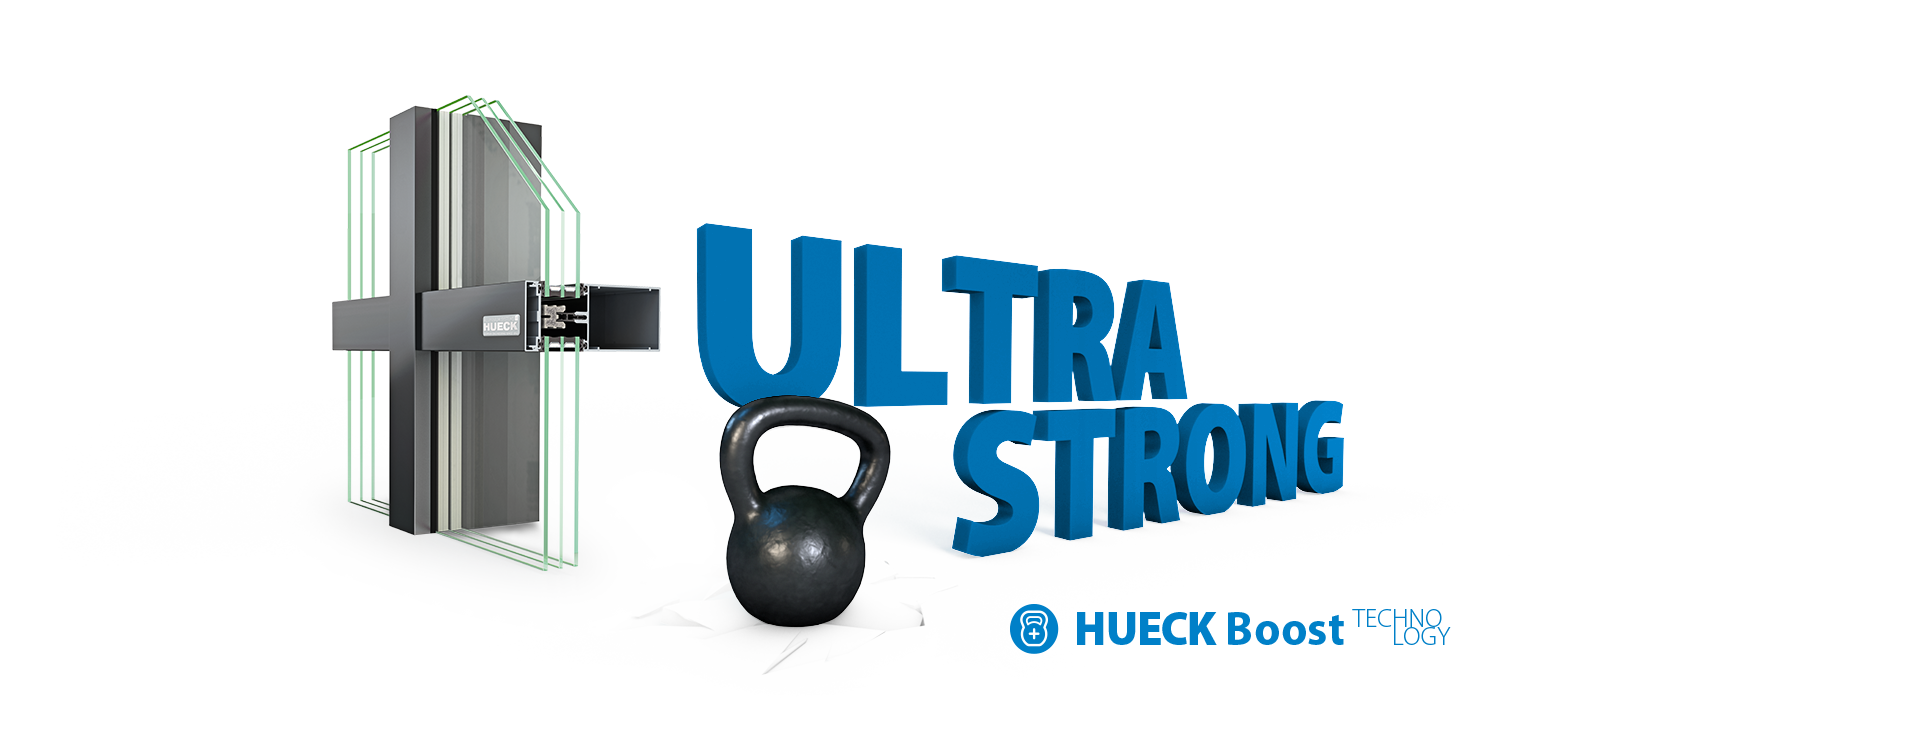 Ultra strong